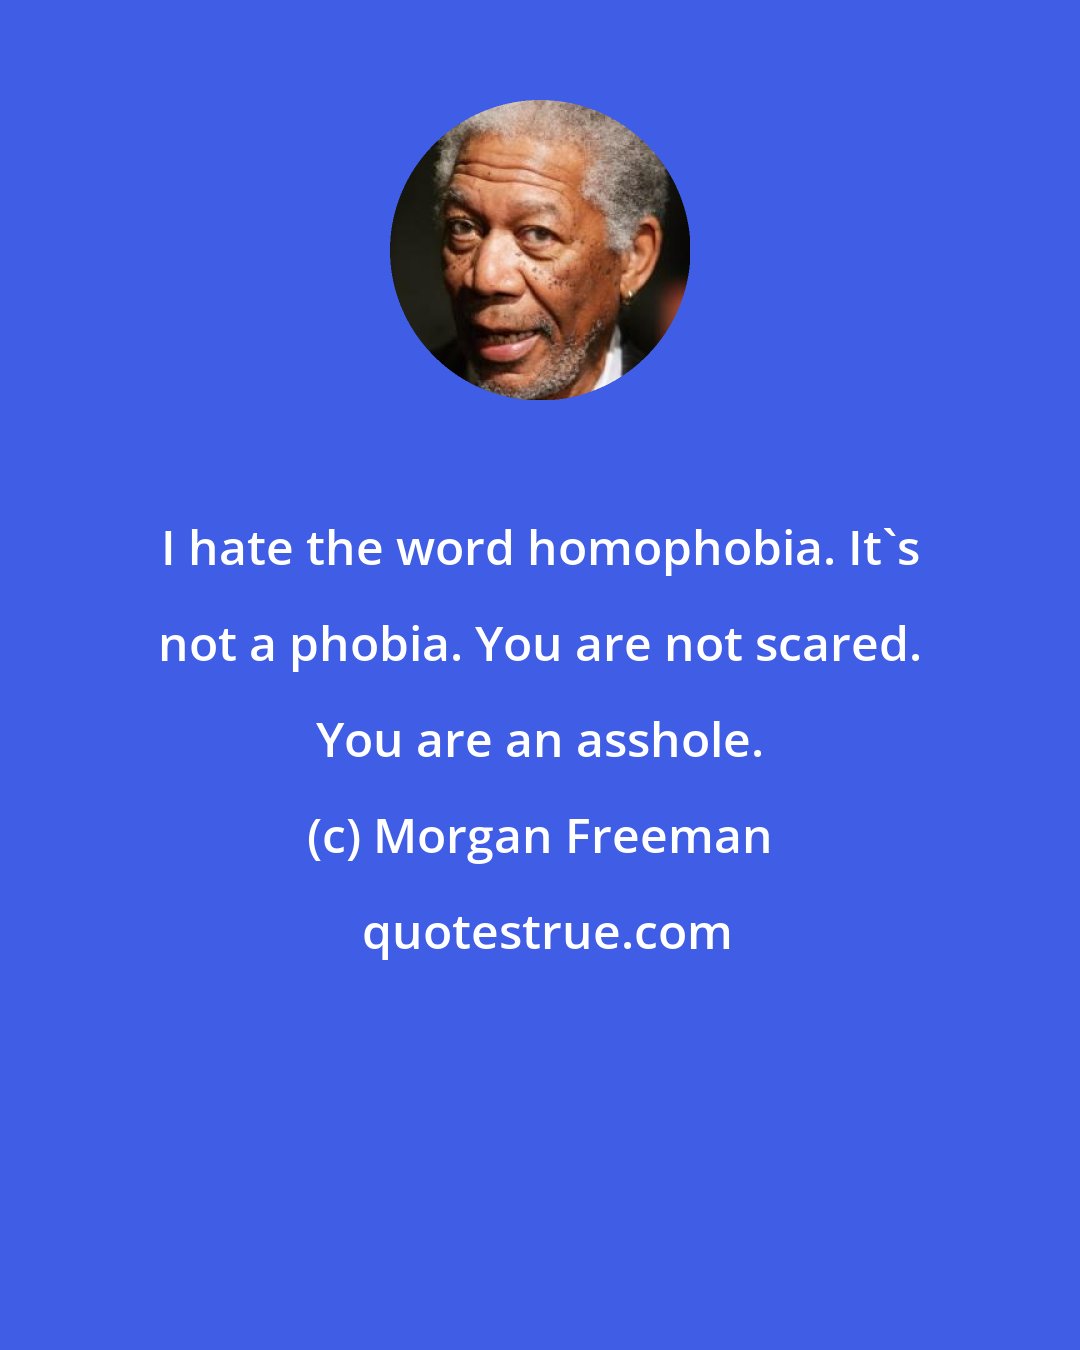 Morgan Freeman: I hate the word homophobia. It's not a phobia. You are not scared. You are an asshole.